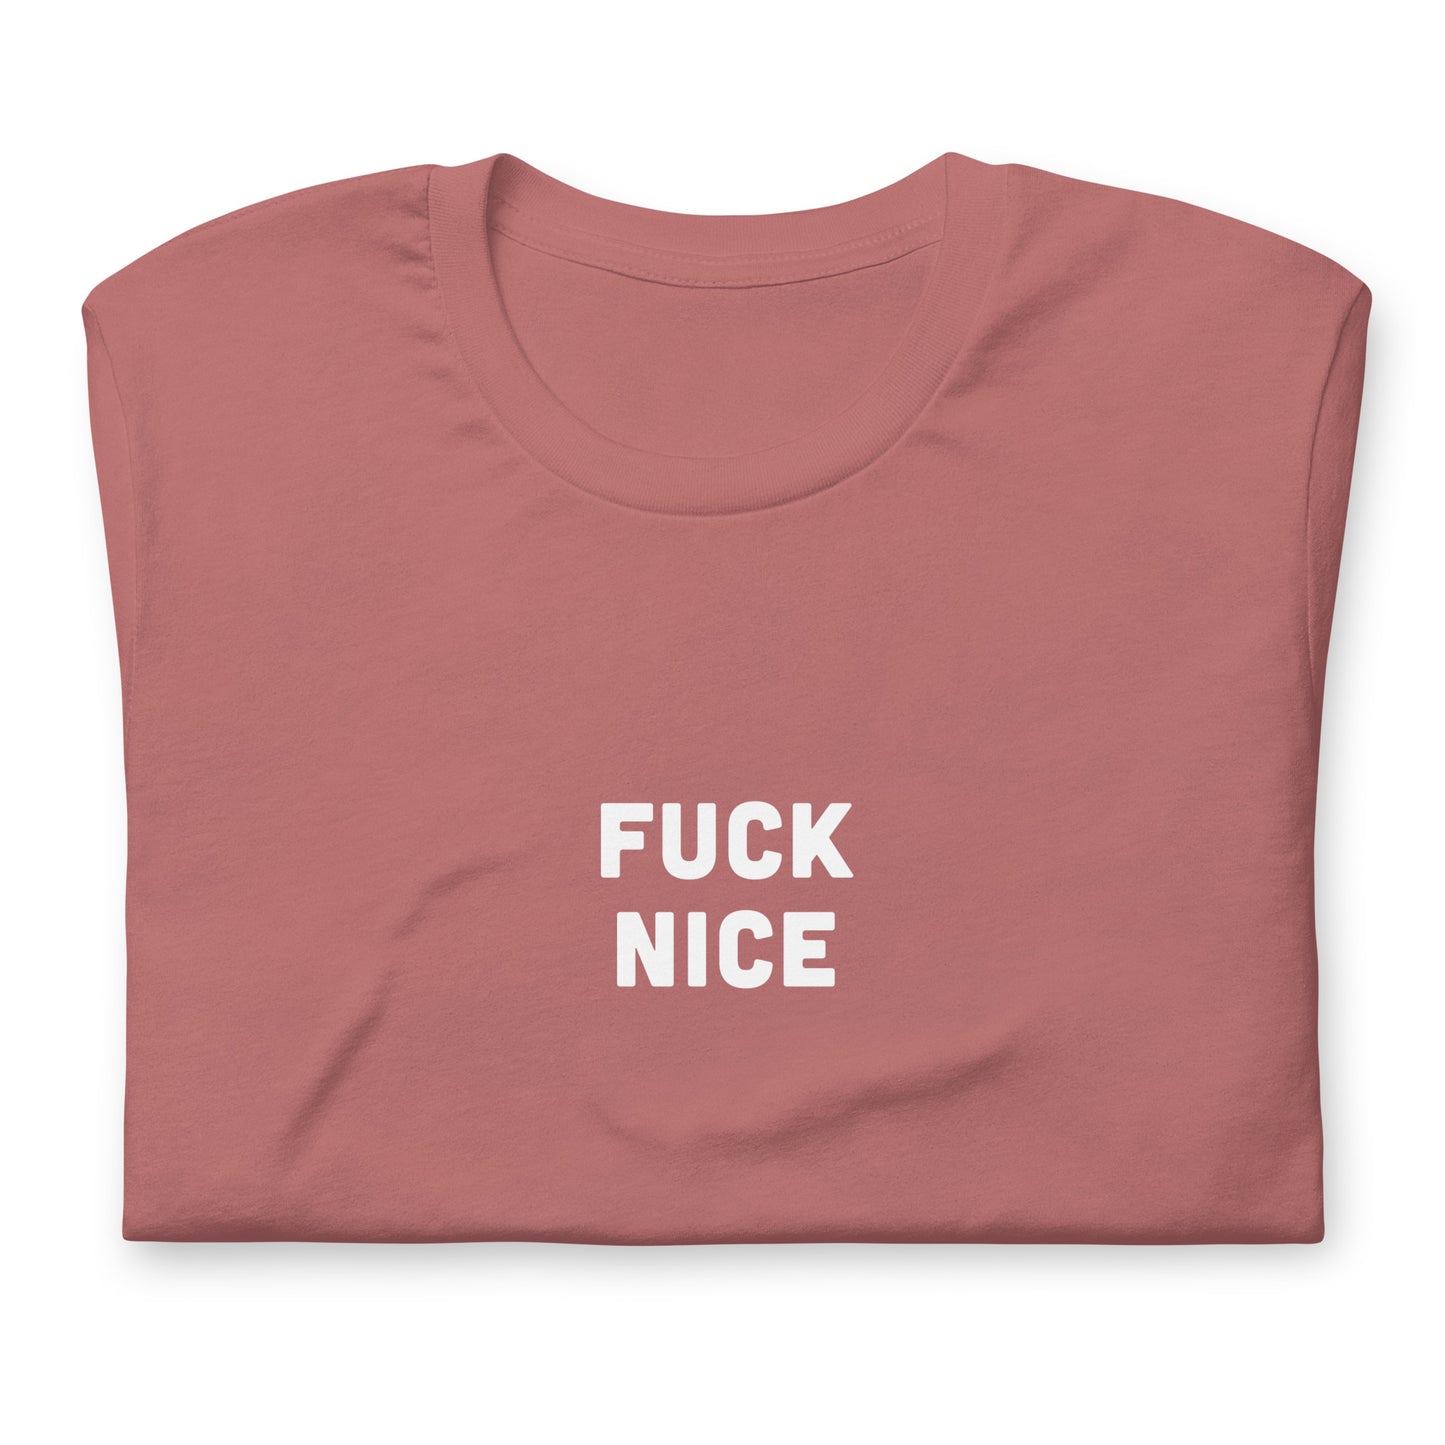 Fuck Nice T-Shirt Size XL Color Navy